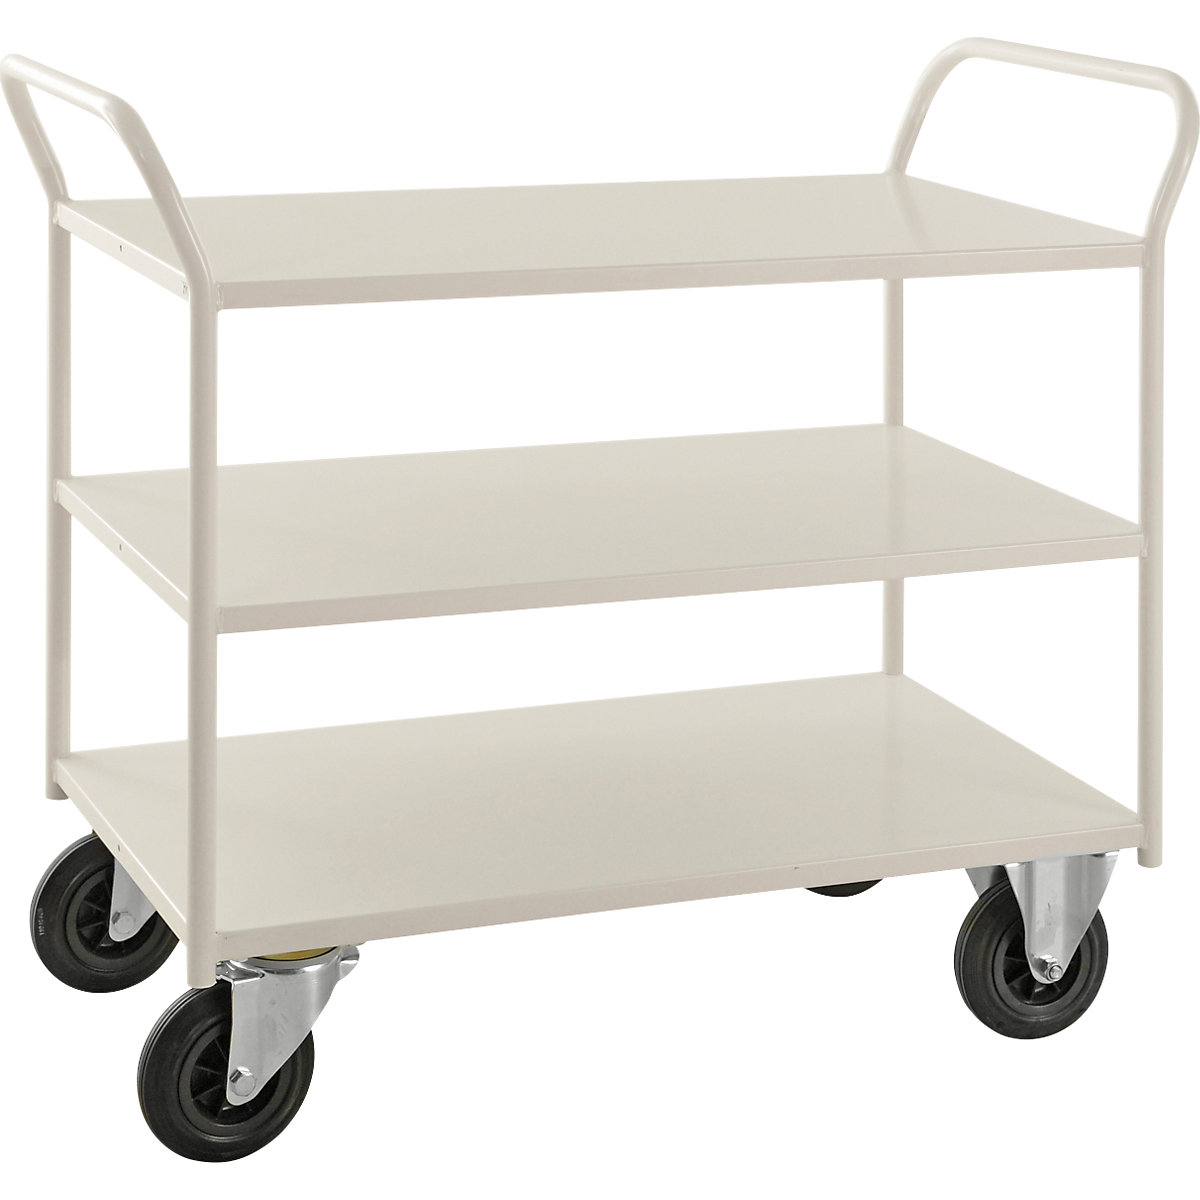 KM41 table trolley – Kongamek, 3 shelves with raised edges, LxWxH 1080 x 450 x 1000 mm, white, 2 swivel castors and 2 fixed castors, 5+ items-4